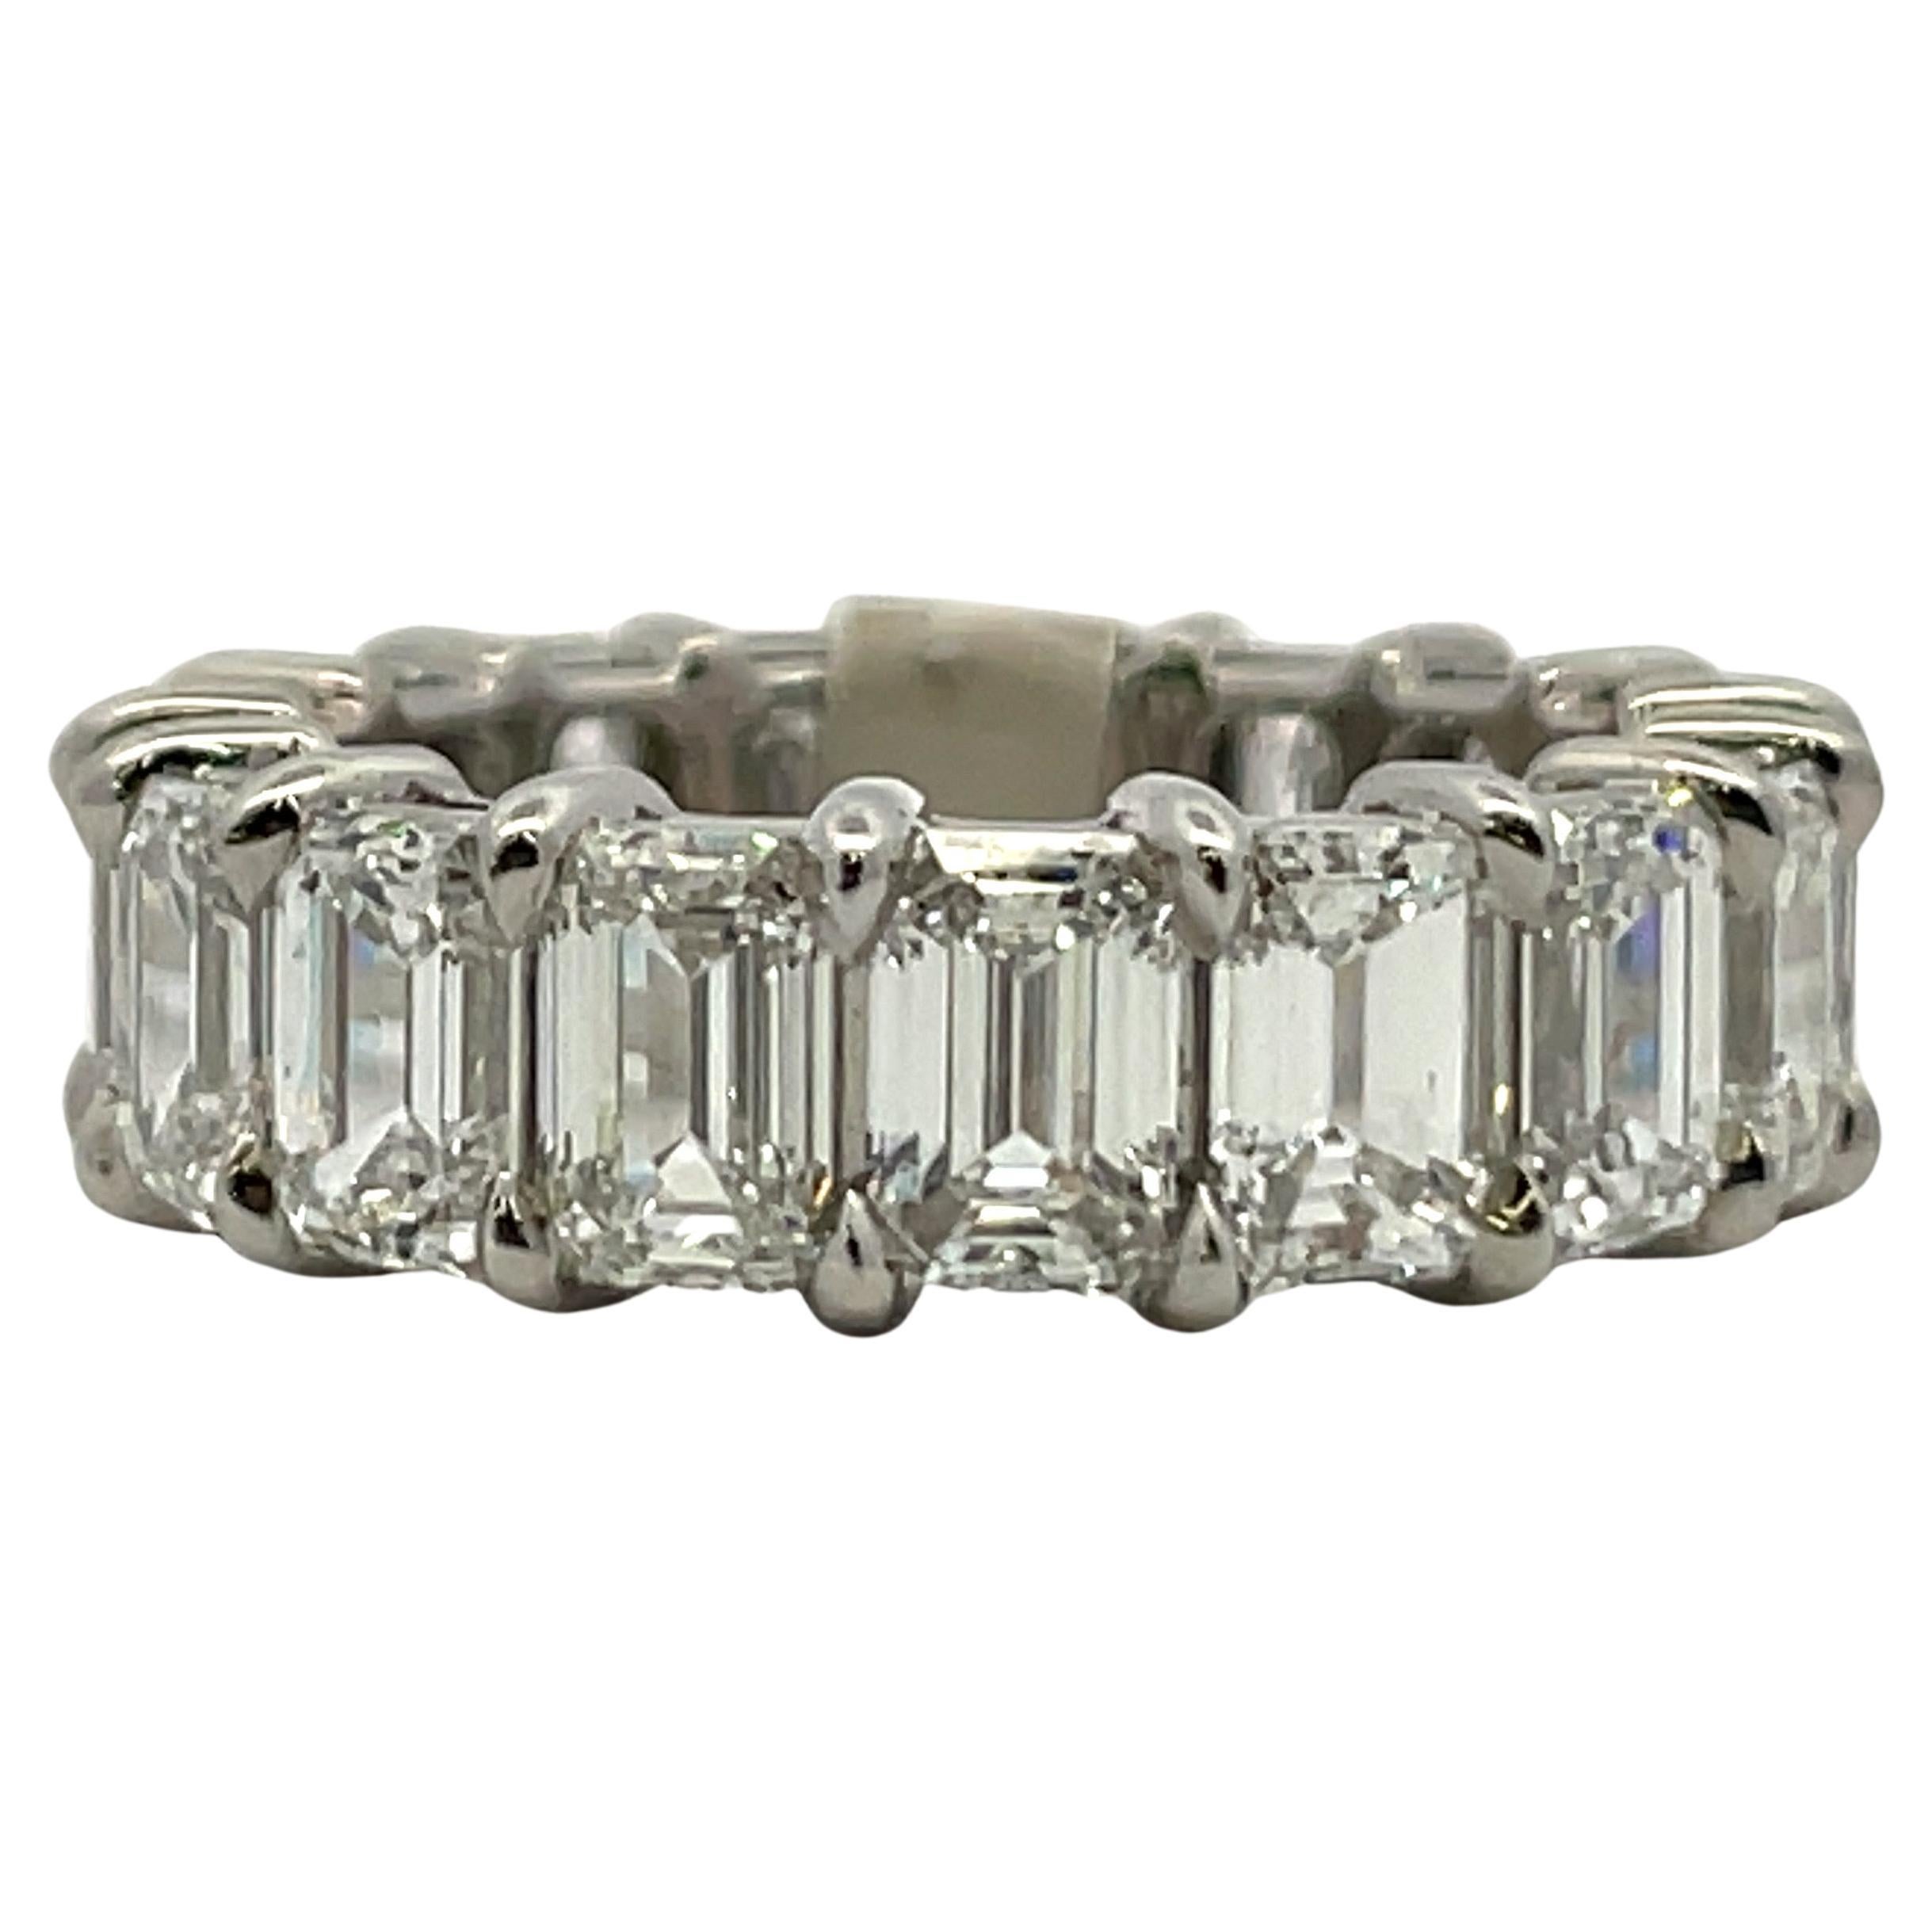 Superb GIA Certified Eternity Ring featuring 17 Emerald Cut Diamonds weighing 8.77 Carats, crafted in Platinum.  
Average 0.52 points 
Very Good-Excellent Cuts
No Fluorescence 
All diamonds are GIA Certified with gradings from D-F Color, IF-VS2